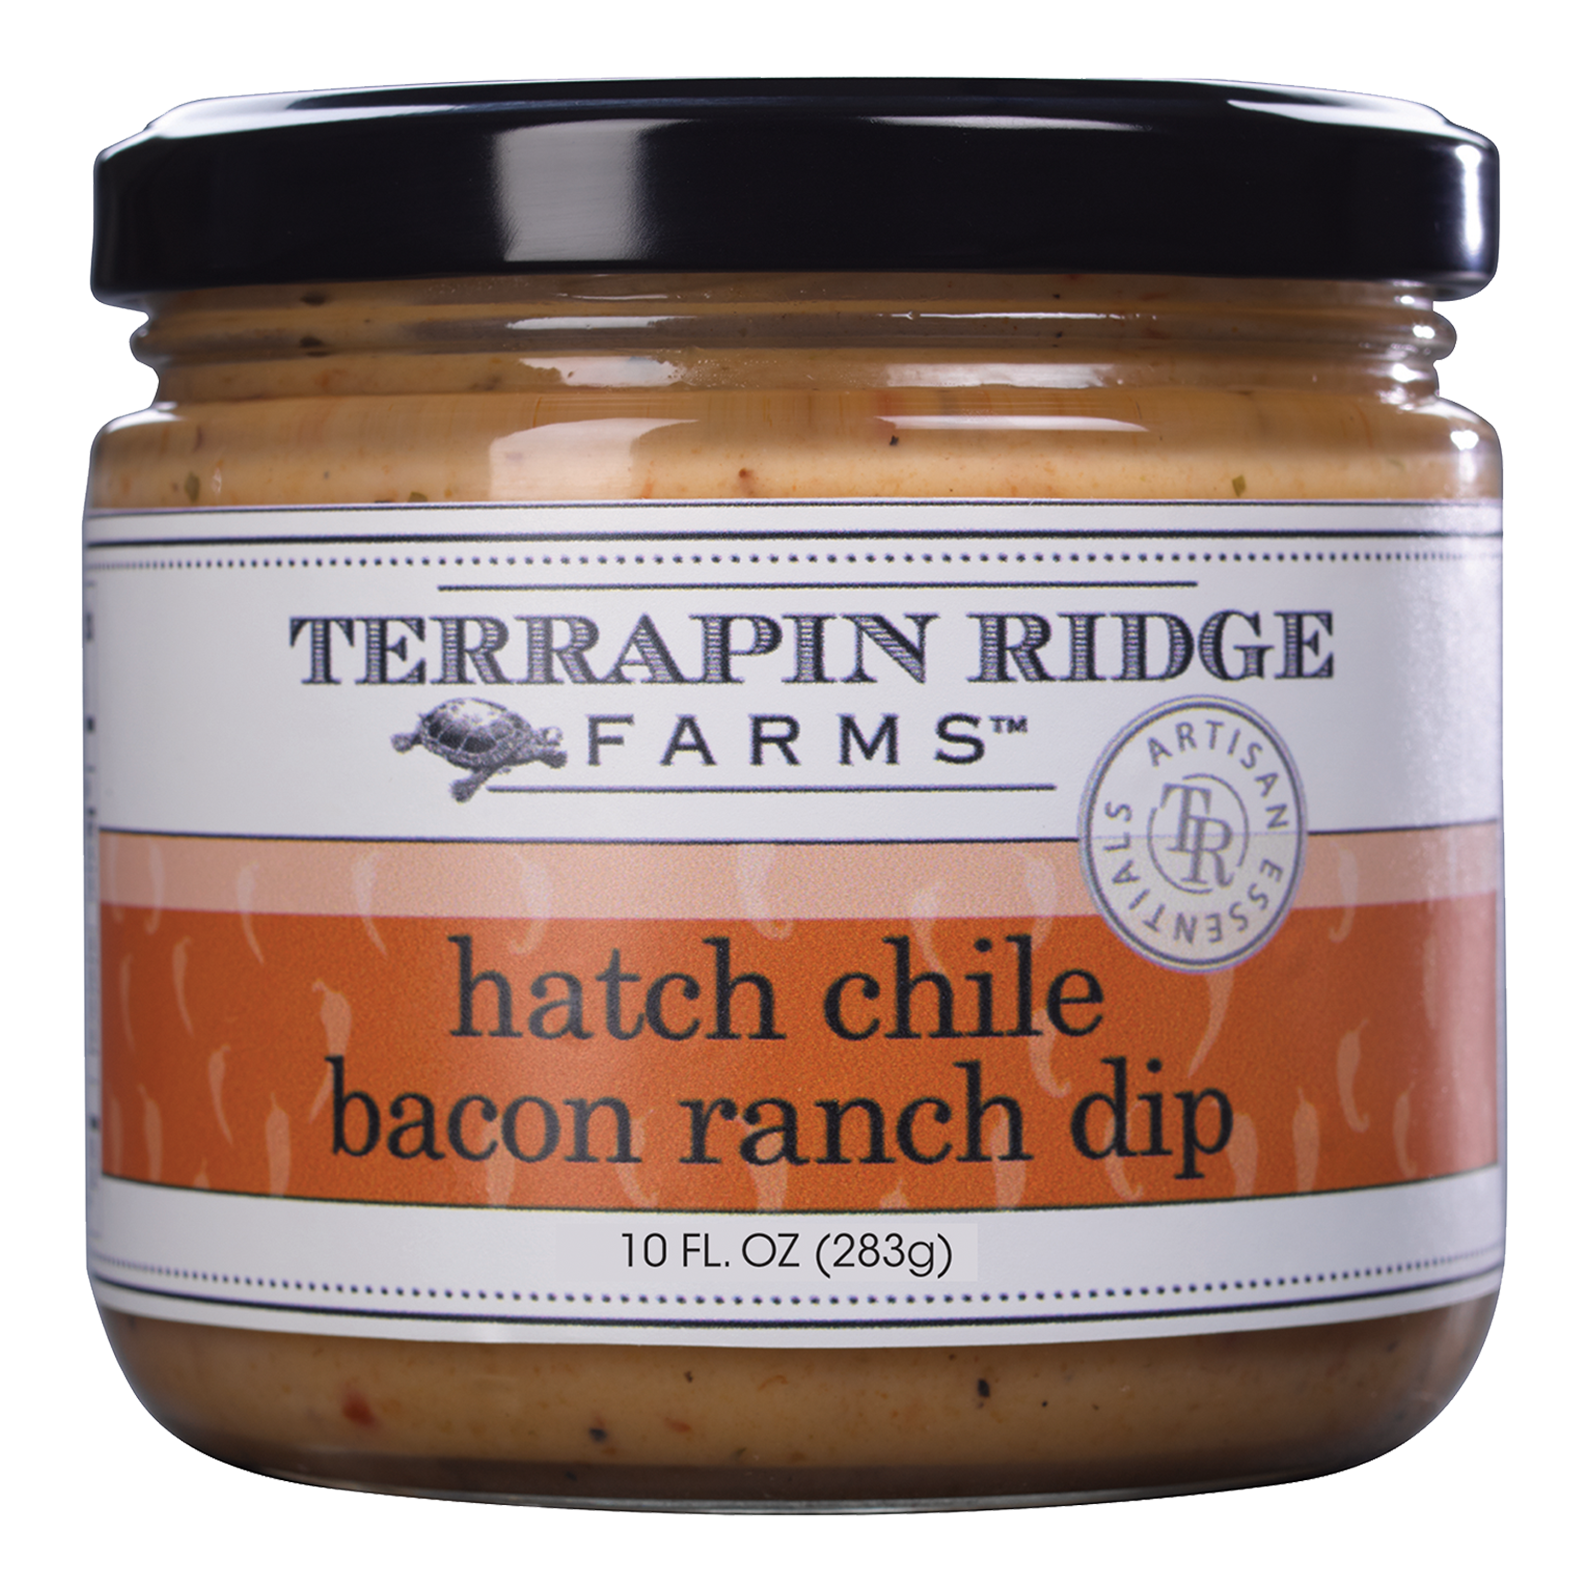 Hatch Chile Bacon Ranch Dip